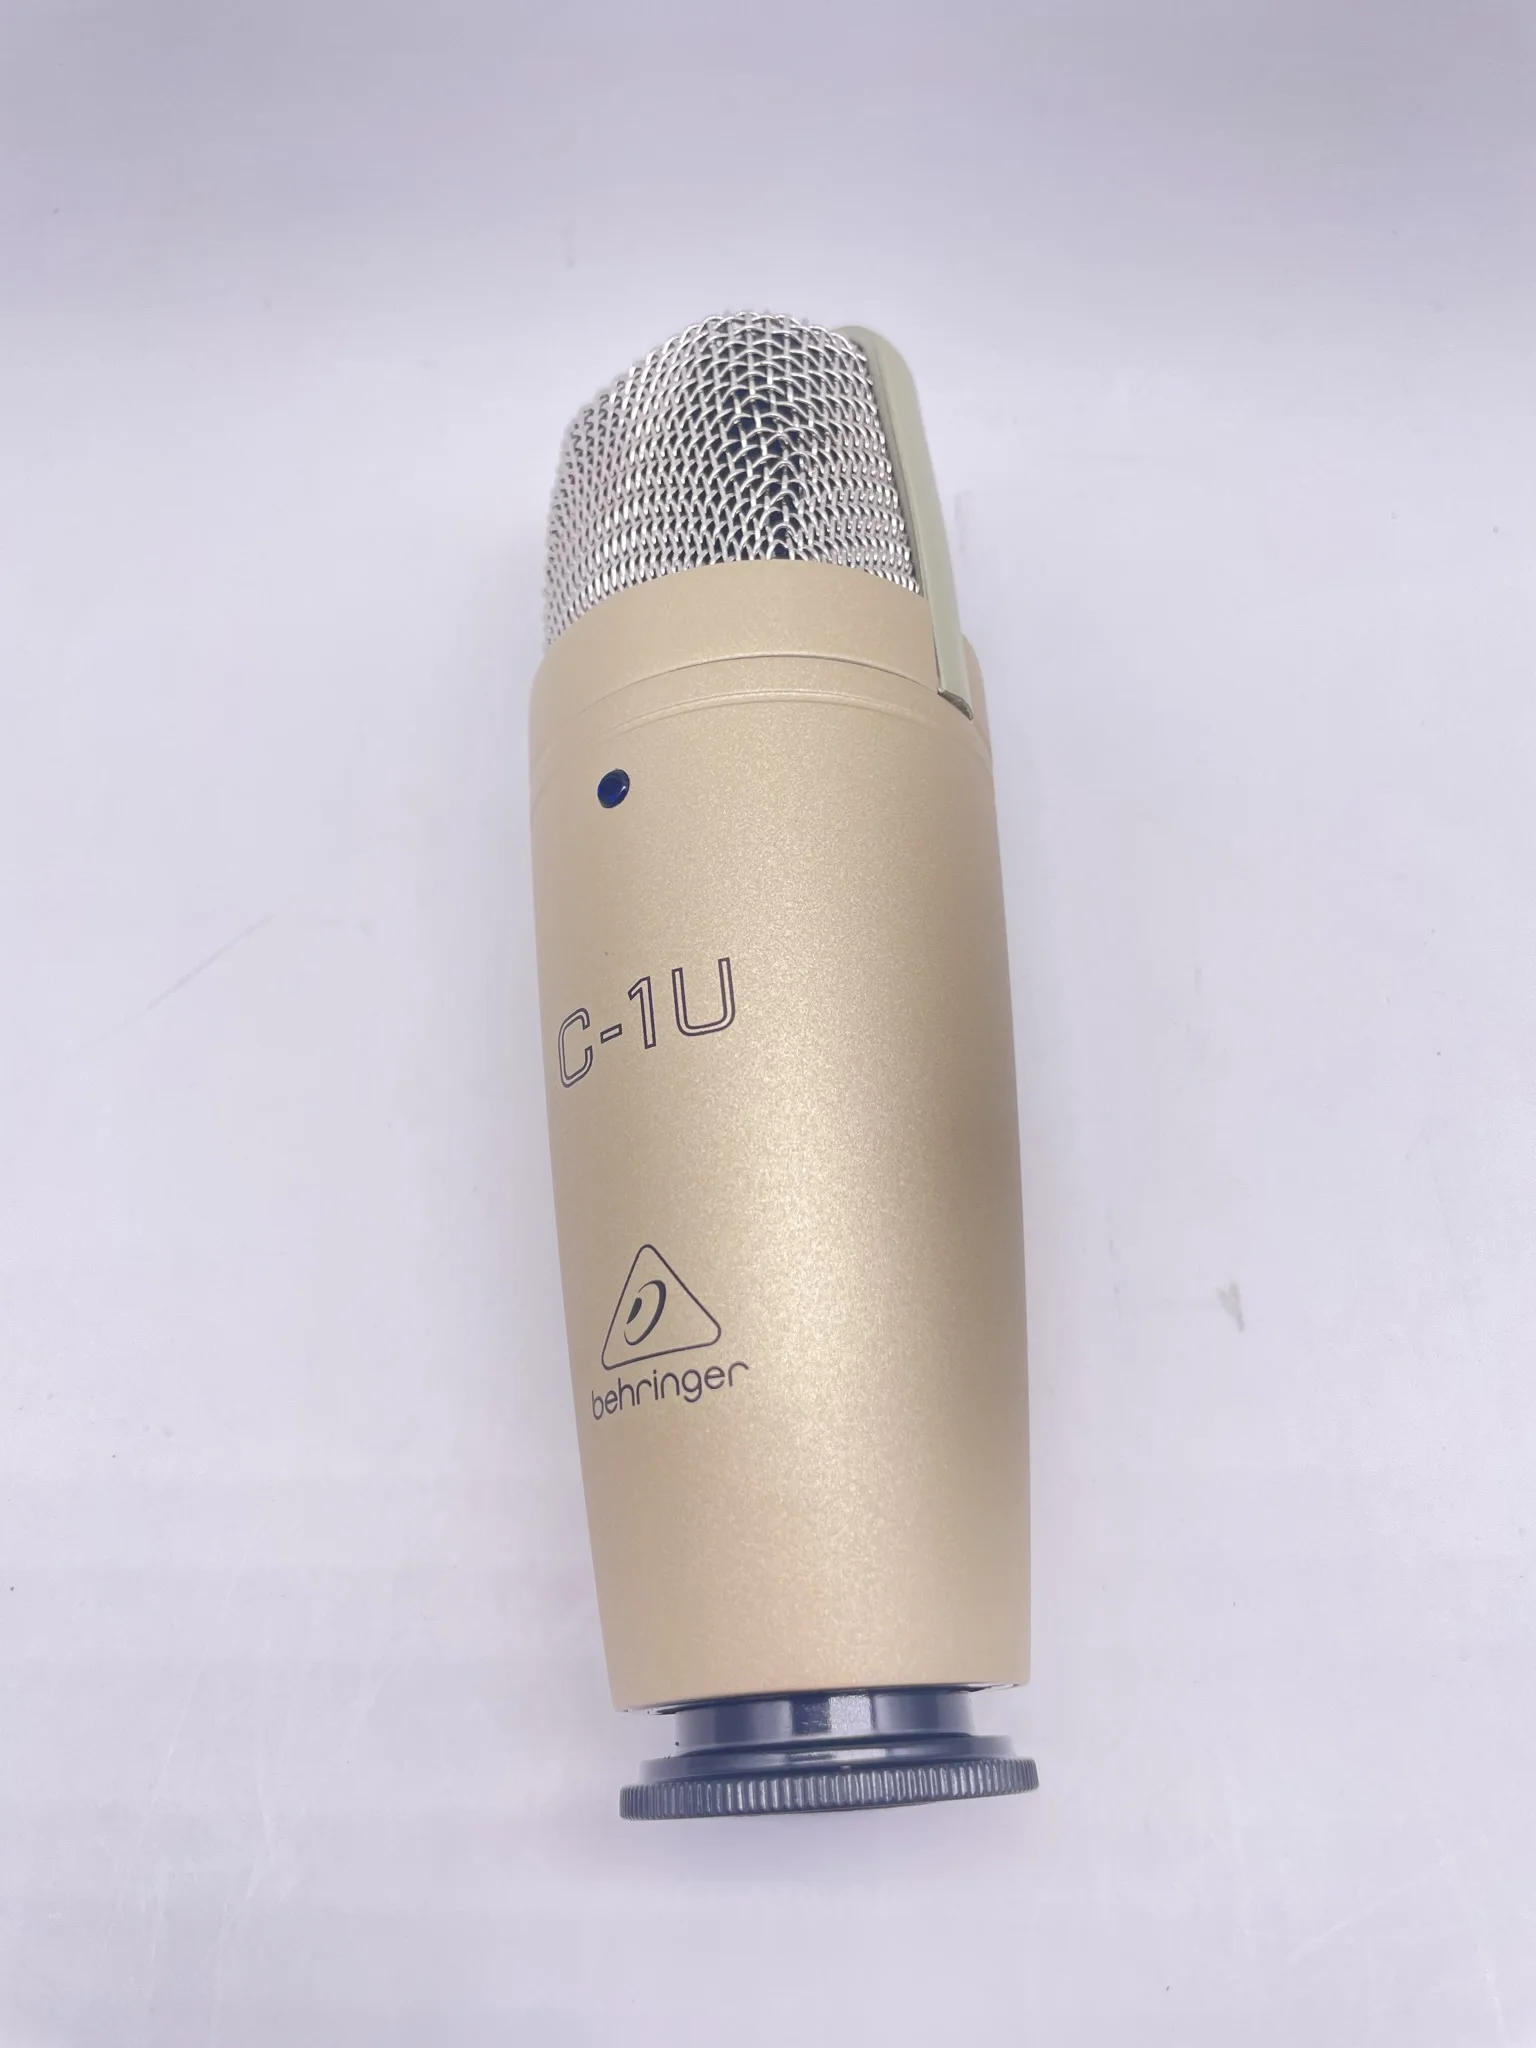 Behringer C-1U USB Studio Condenser Microphone with swivel mic stand mount  for digital home recording and podcasting enthusiasts - AliExpress